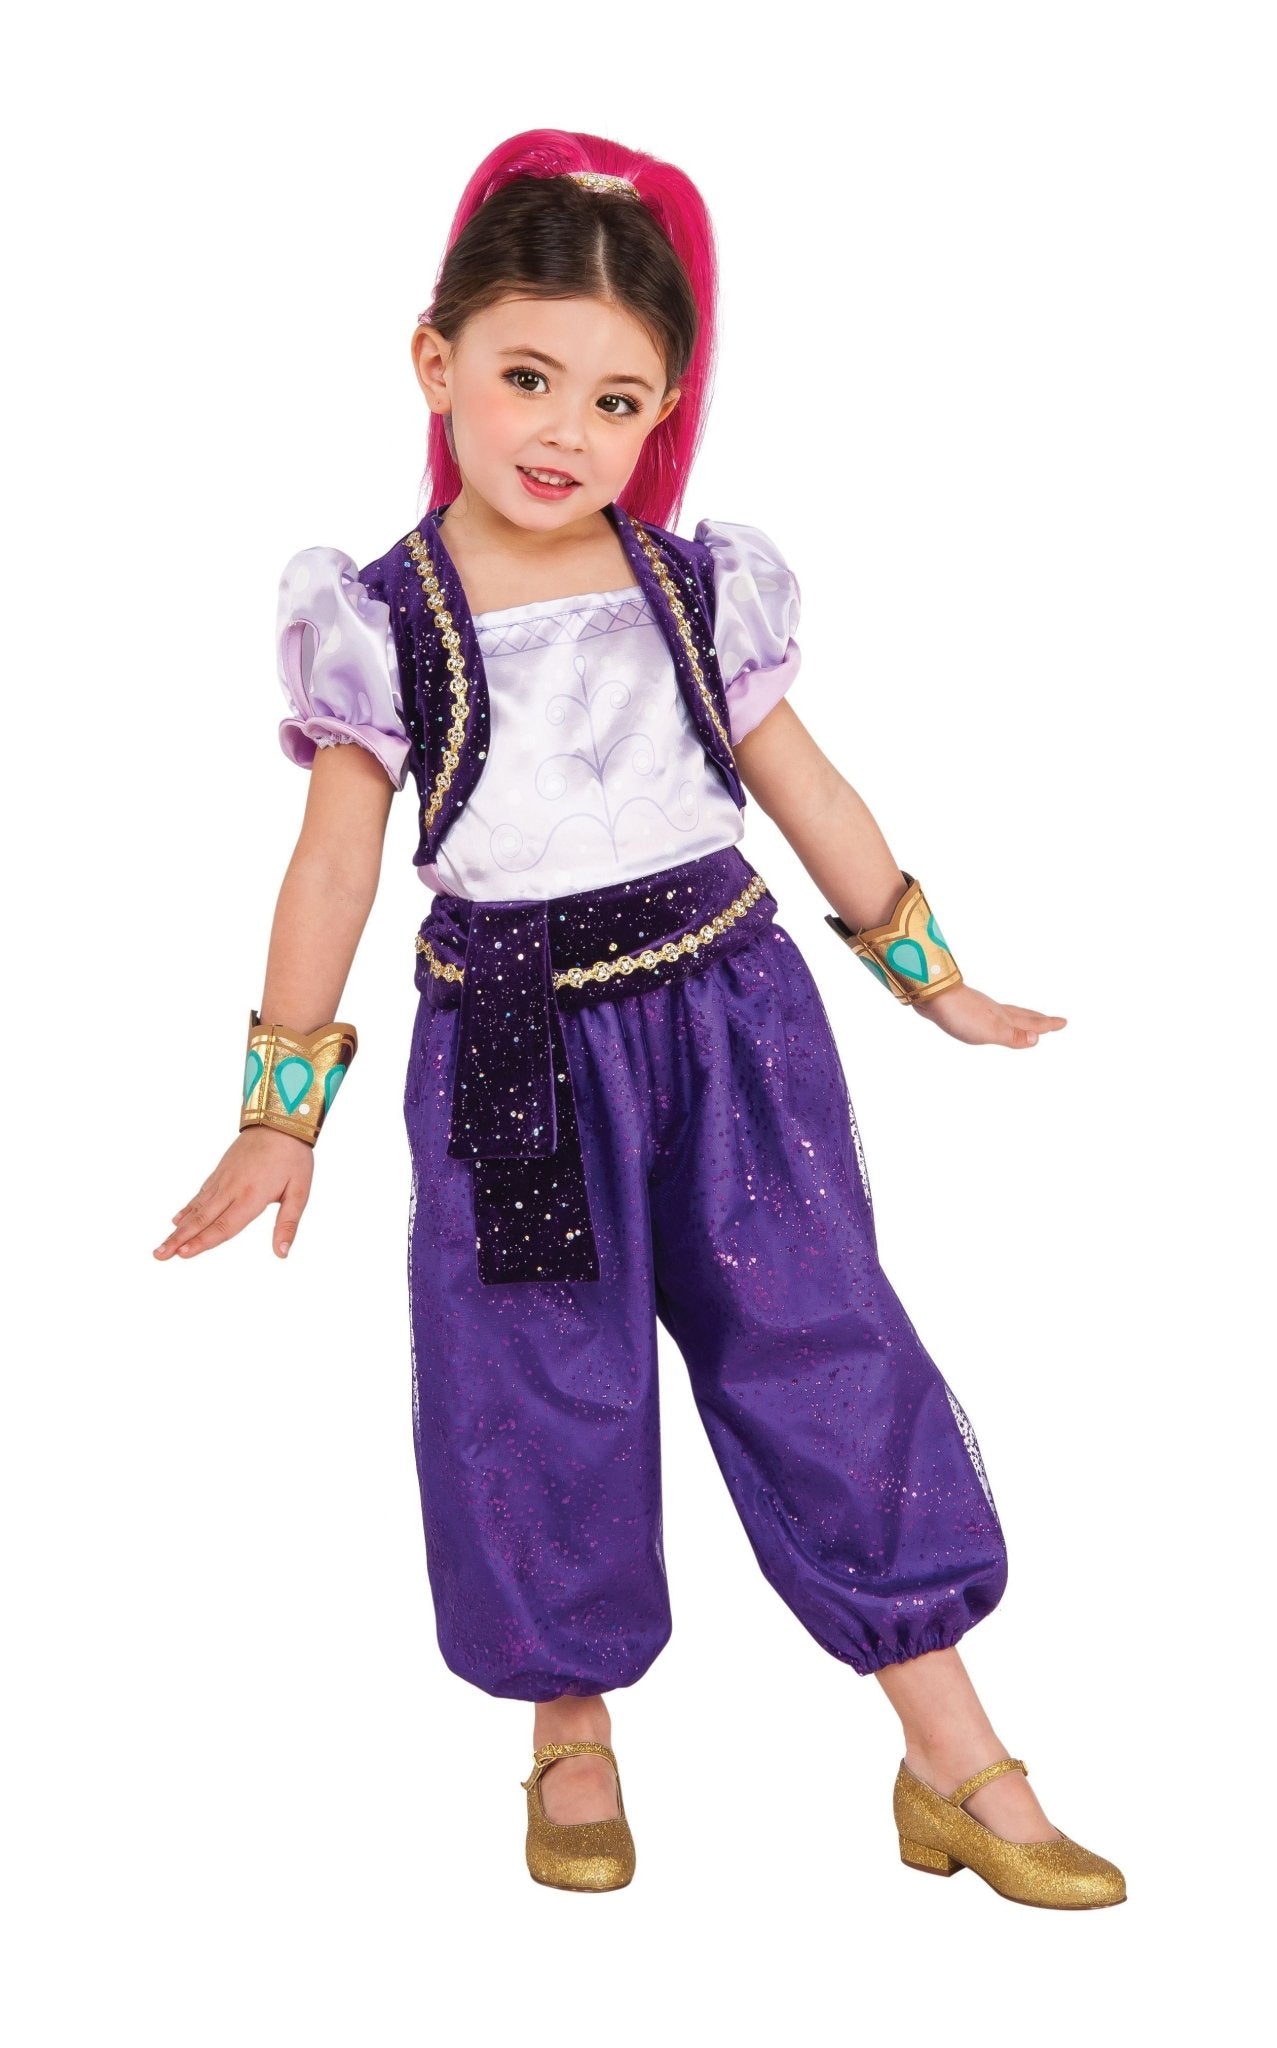 Shimmer Deluxe Costume RUB-620792 SMALL - JJ's Party House